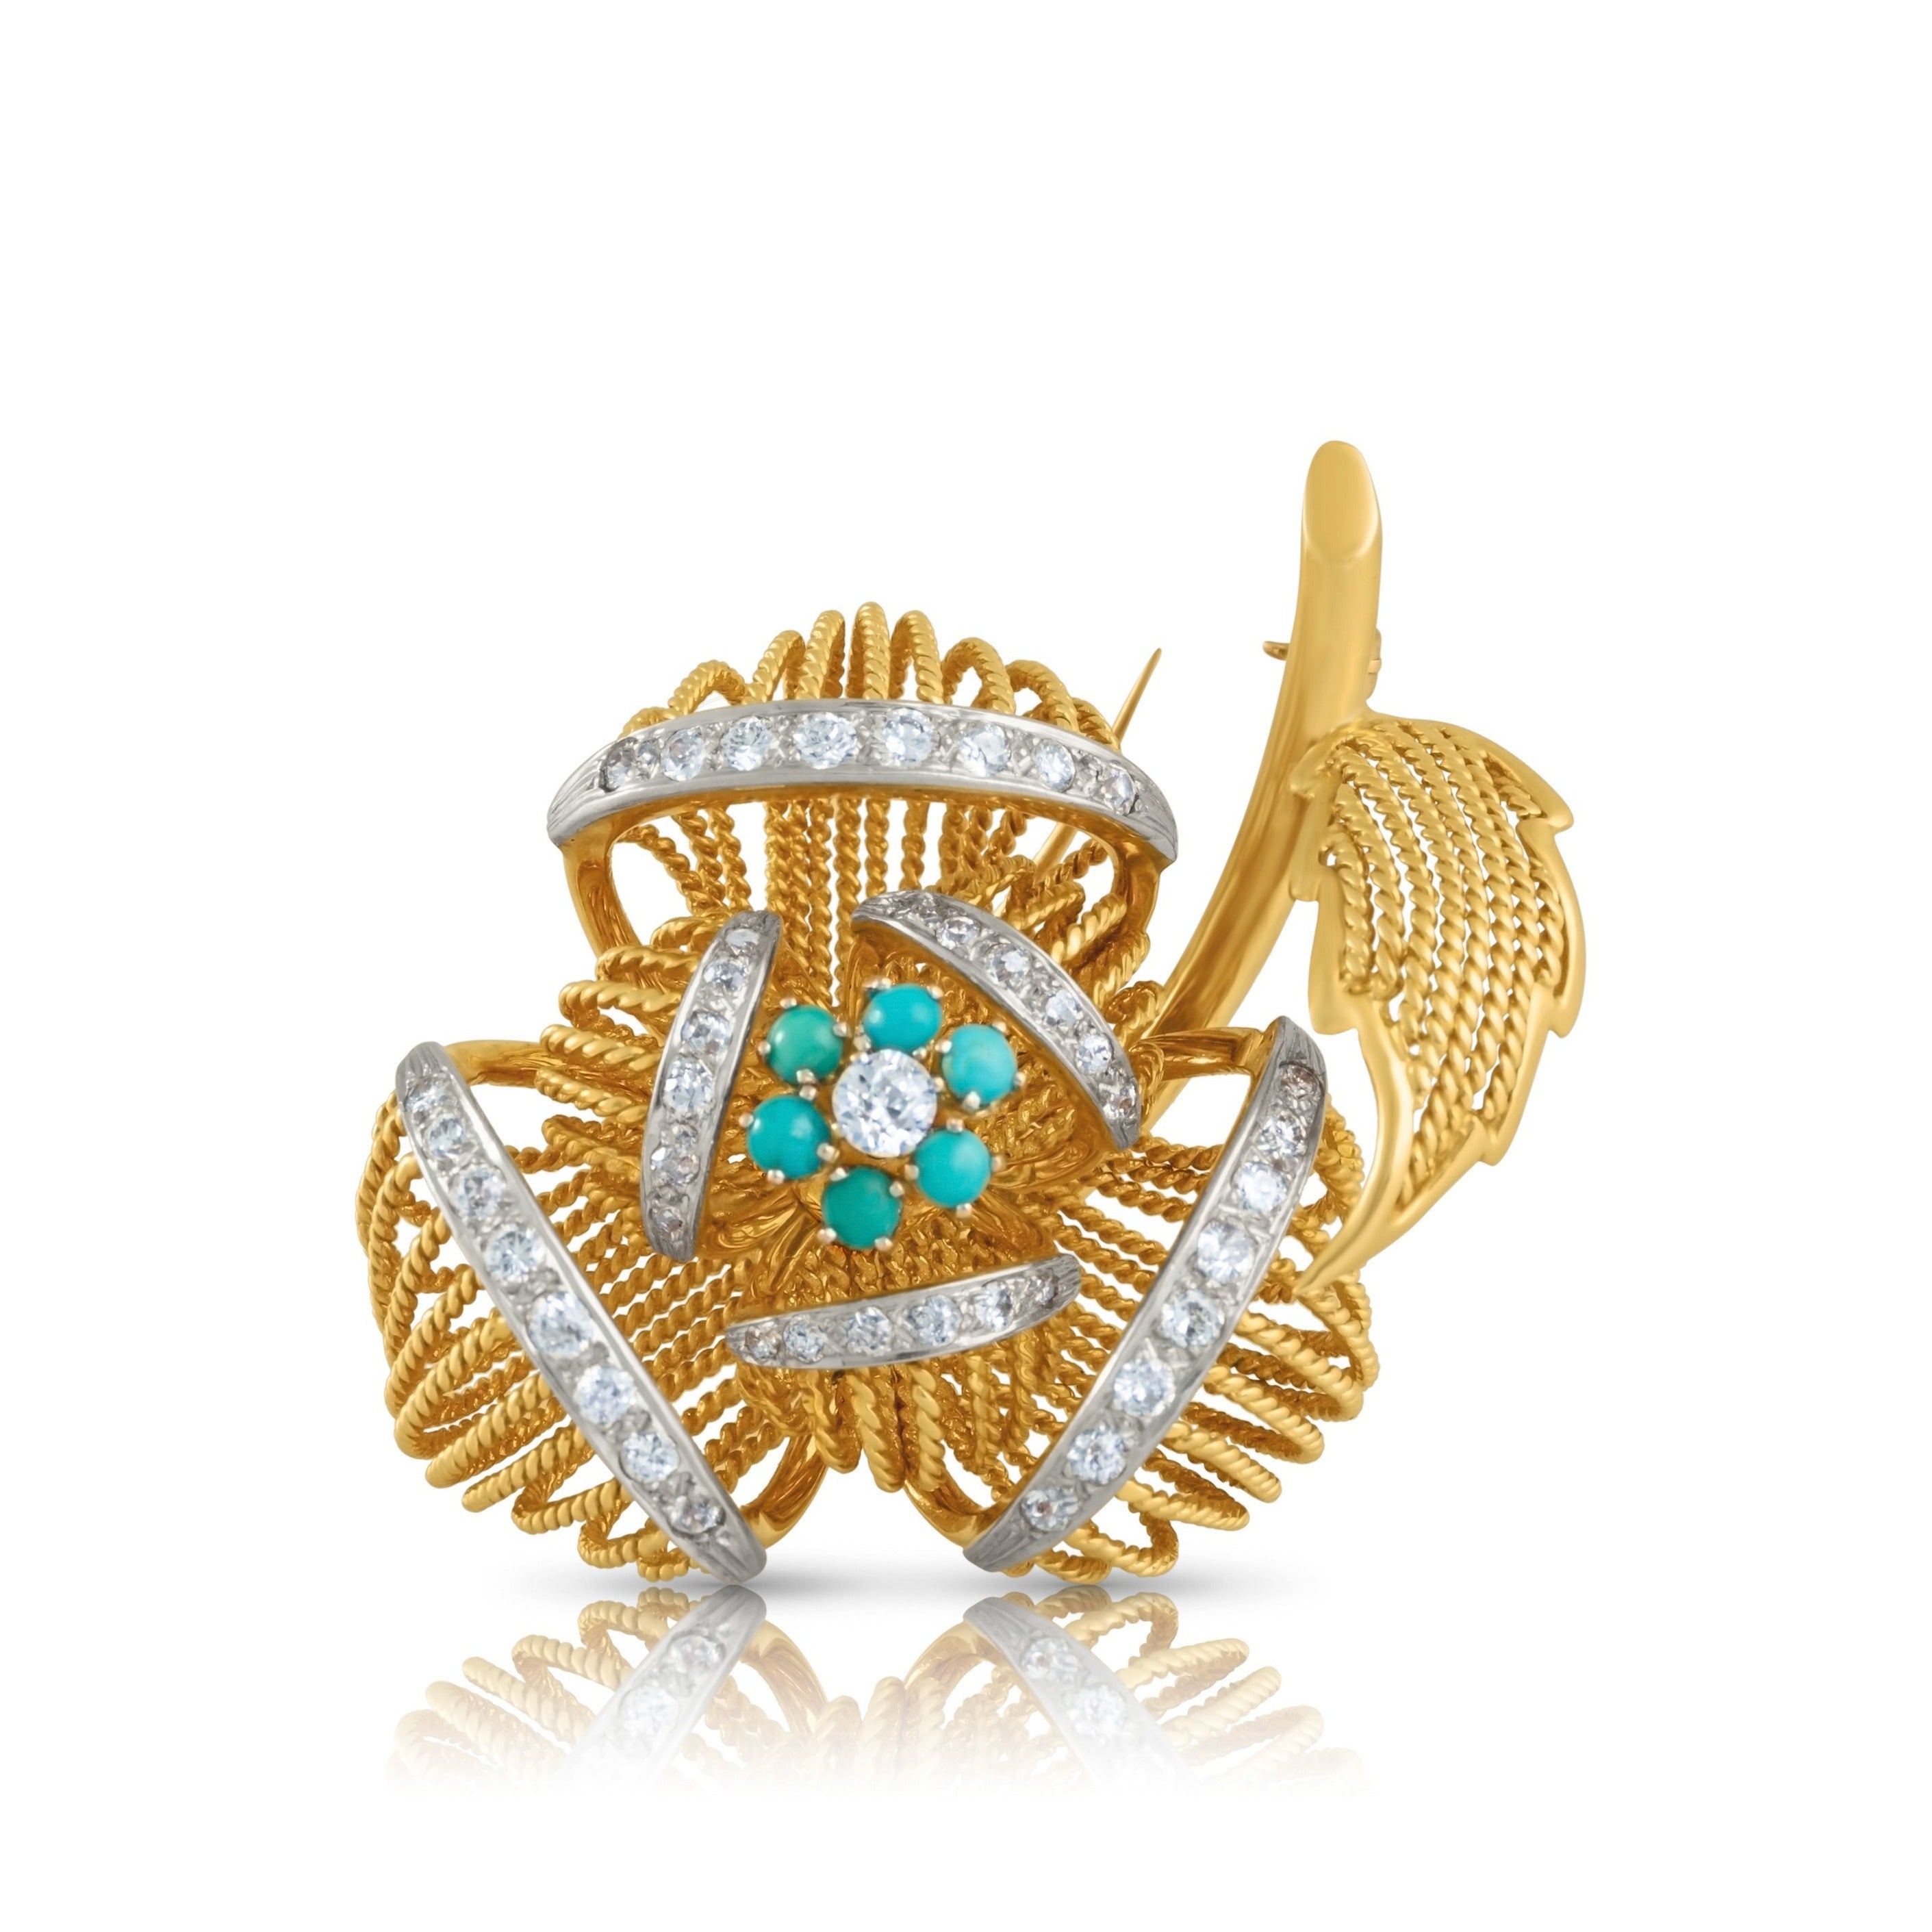 Flower brooch/fur clip in gold and platinum with diamonds and turquoise centre.